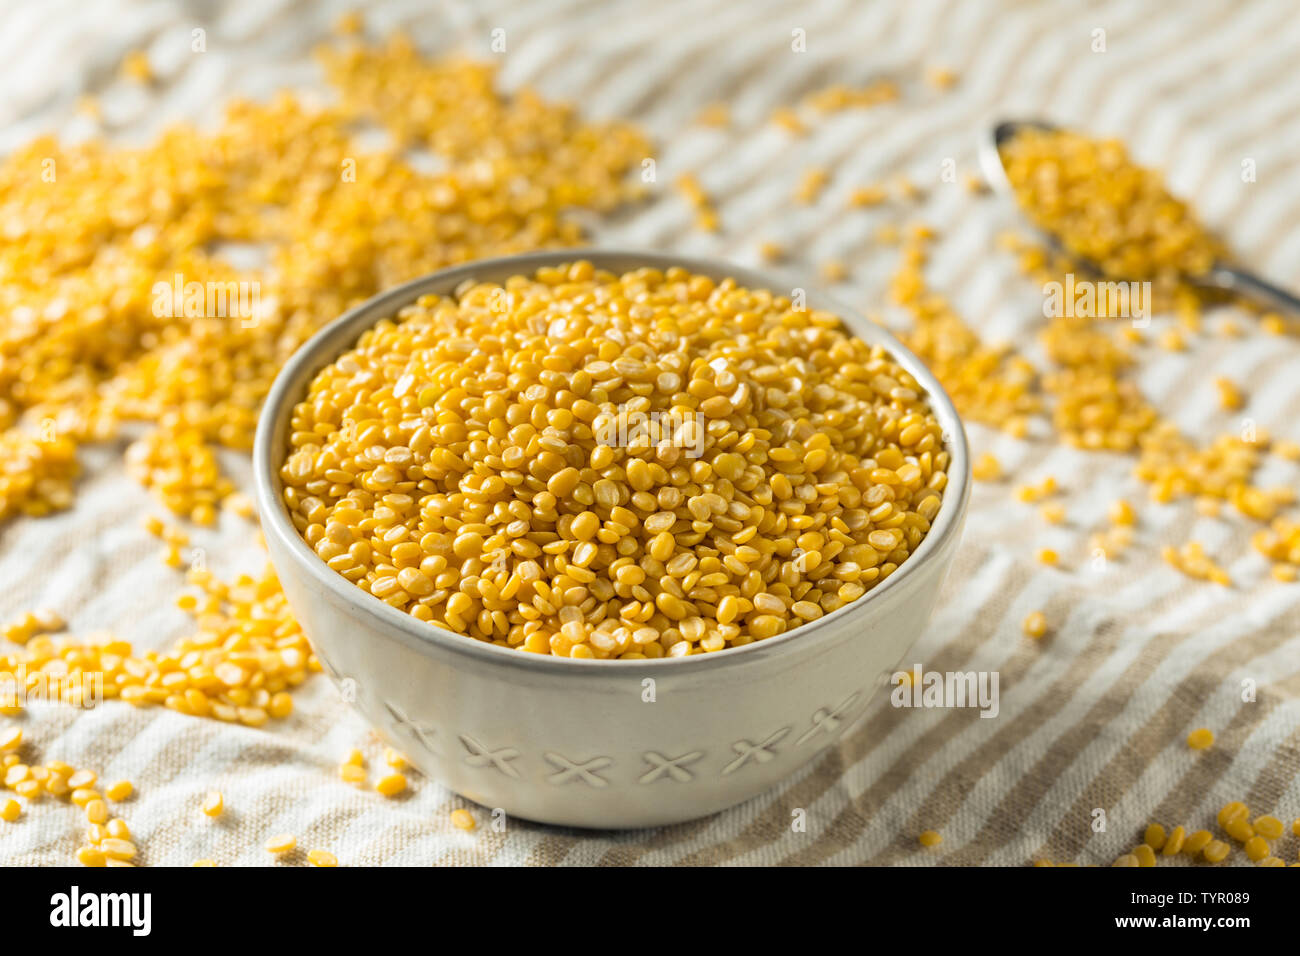 Dried Organic Moong Dal Split Mung Beans in a Bowl Stock Photo